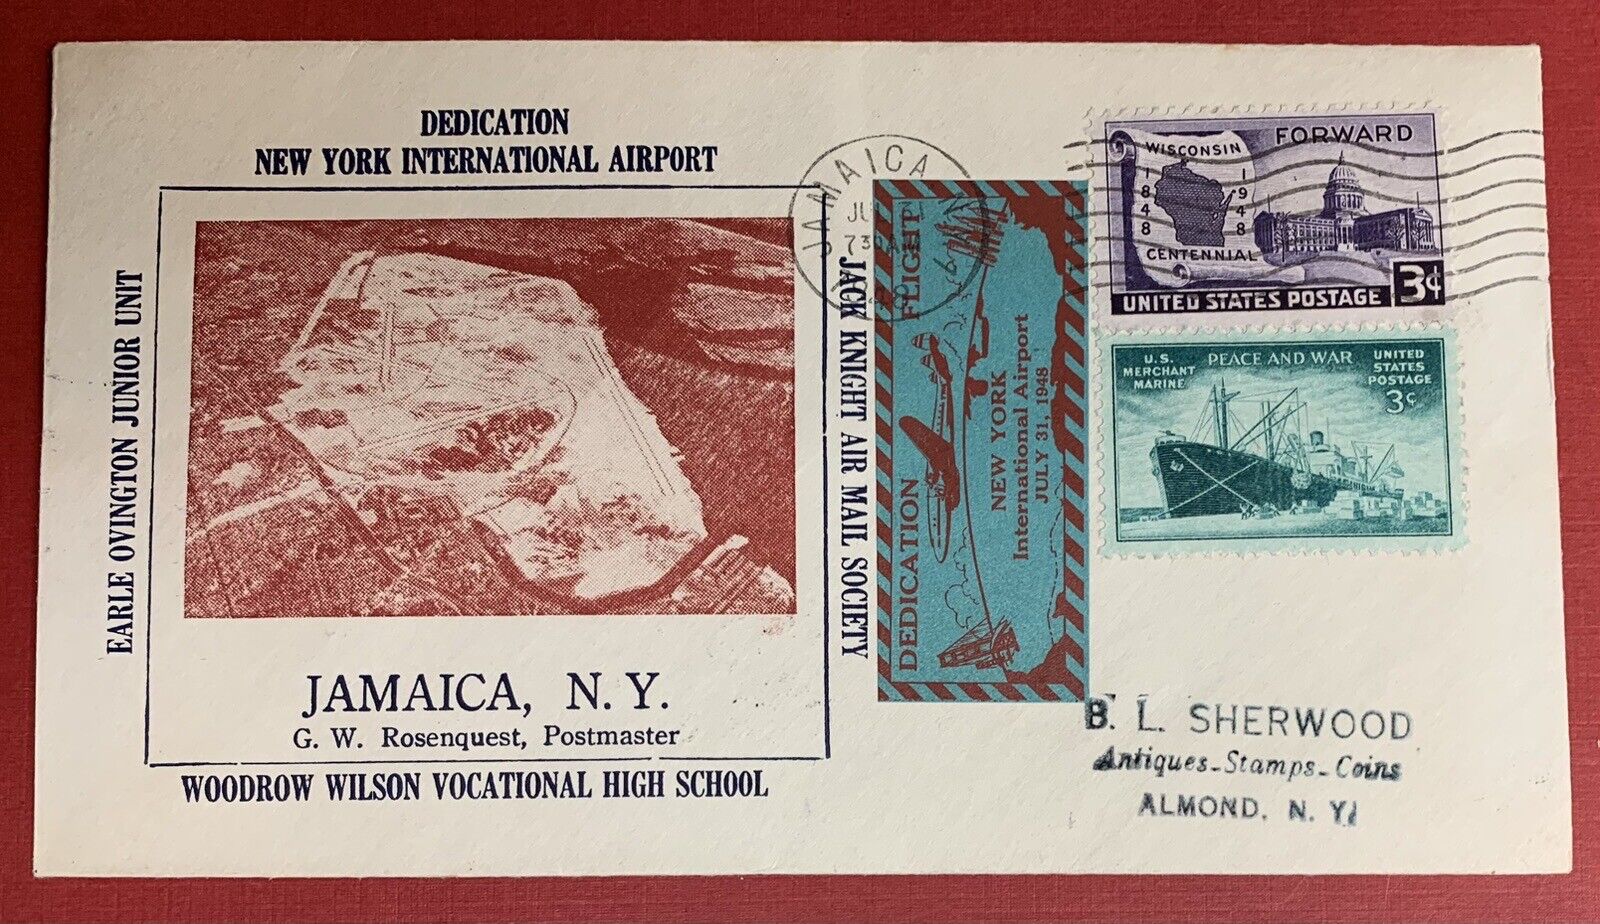 New York International Airport Dedication Cover, 1948, Jamaica, N.Y., with Label